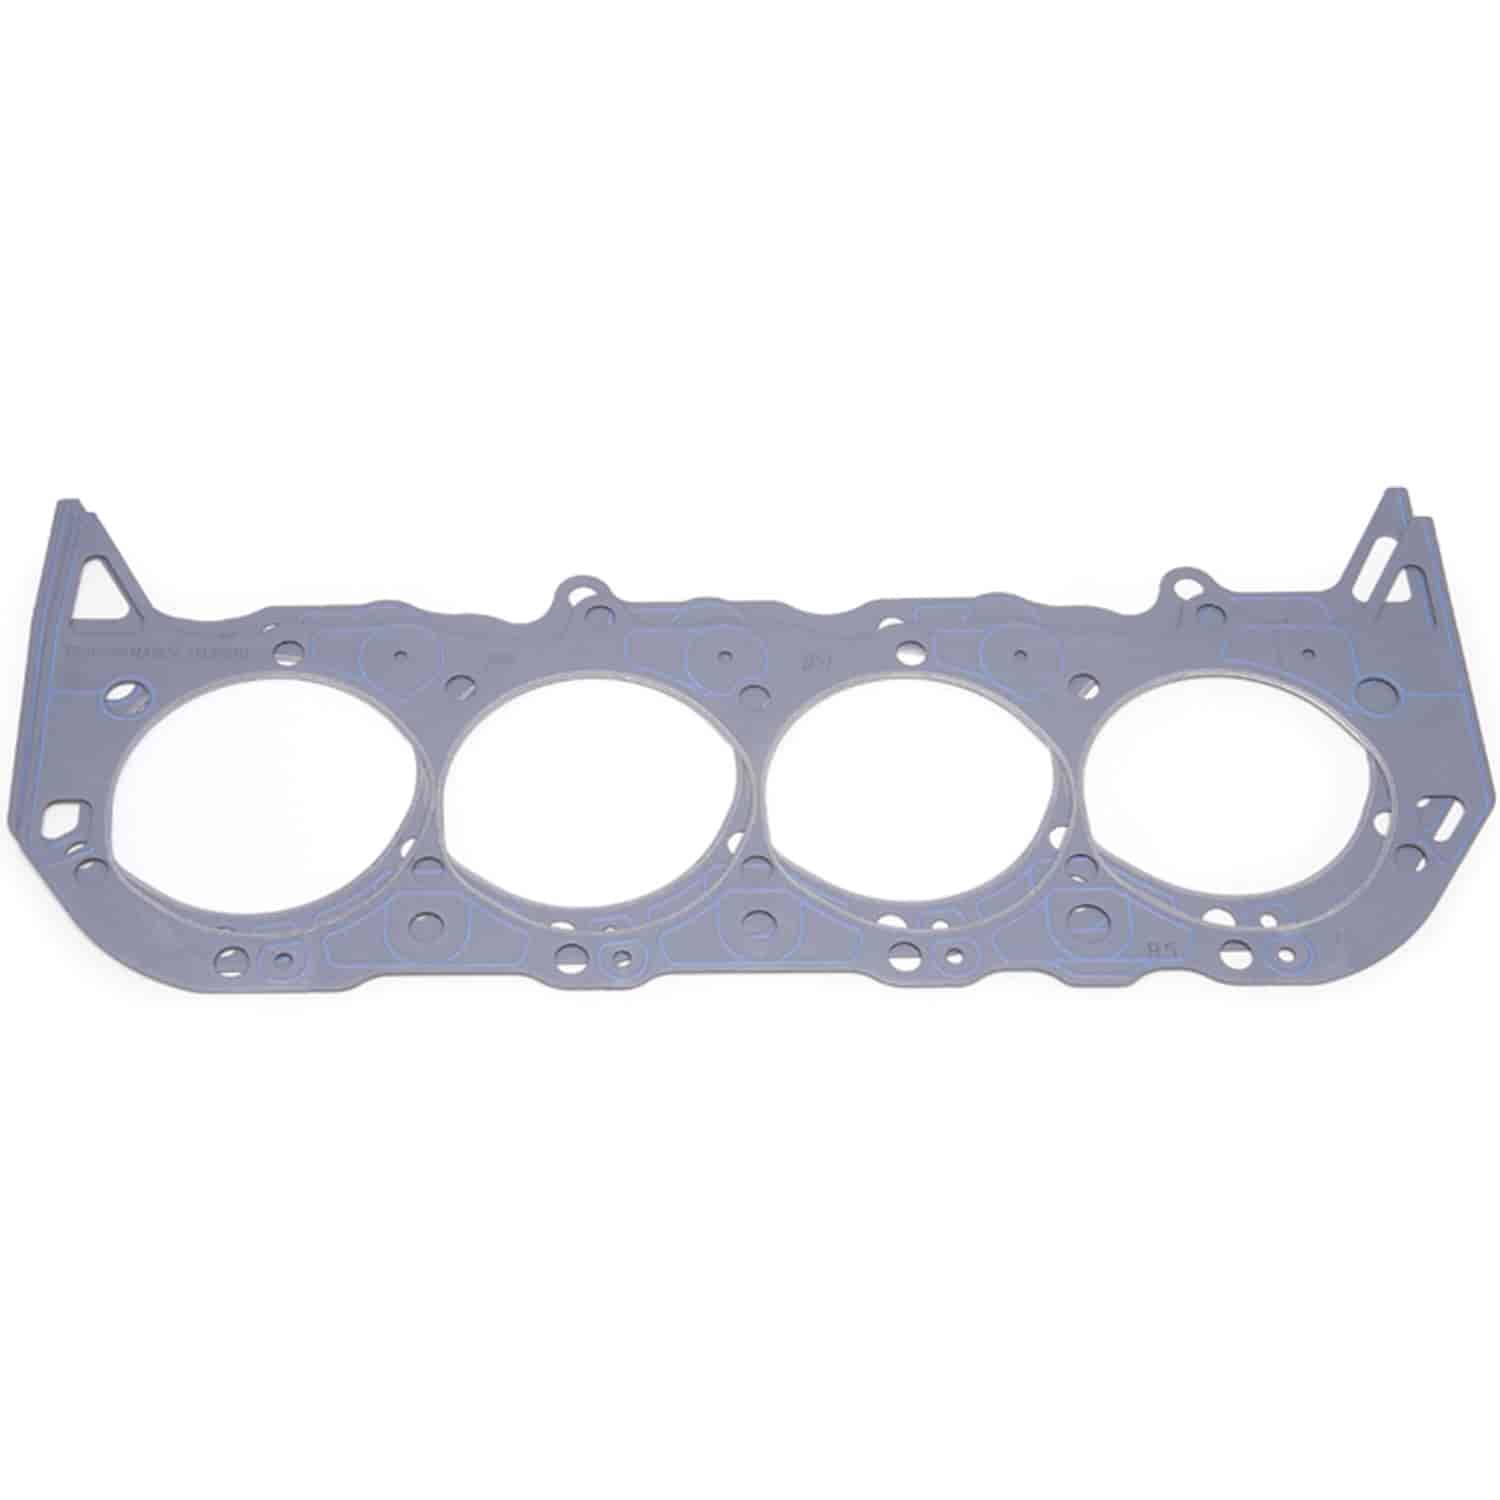 Cylinder Head Gasket for Big Block Chevy 502